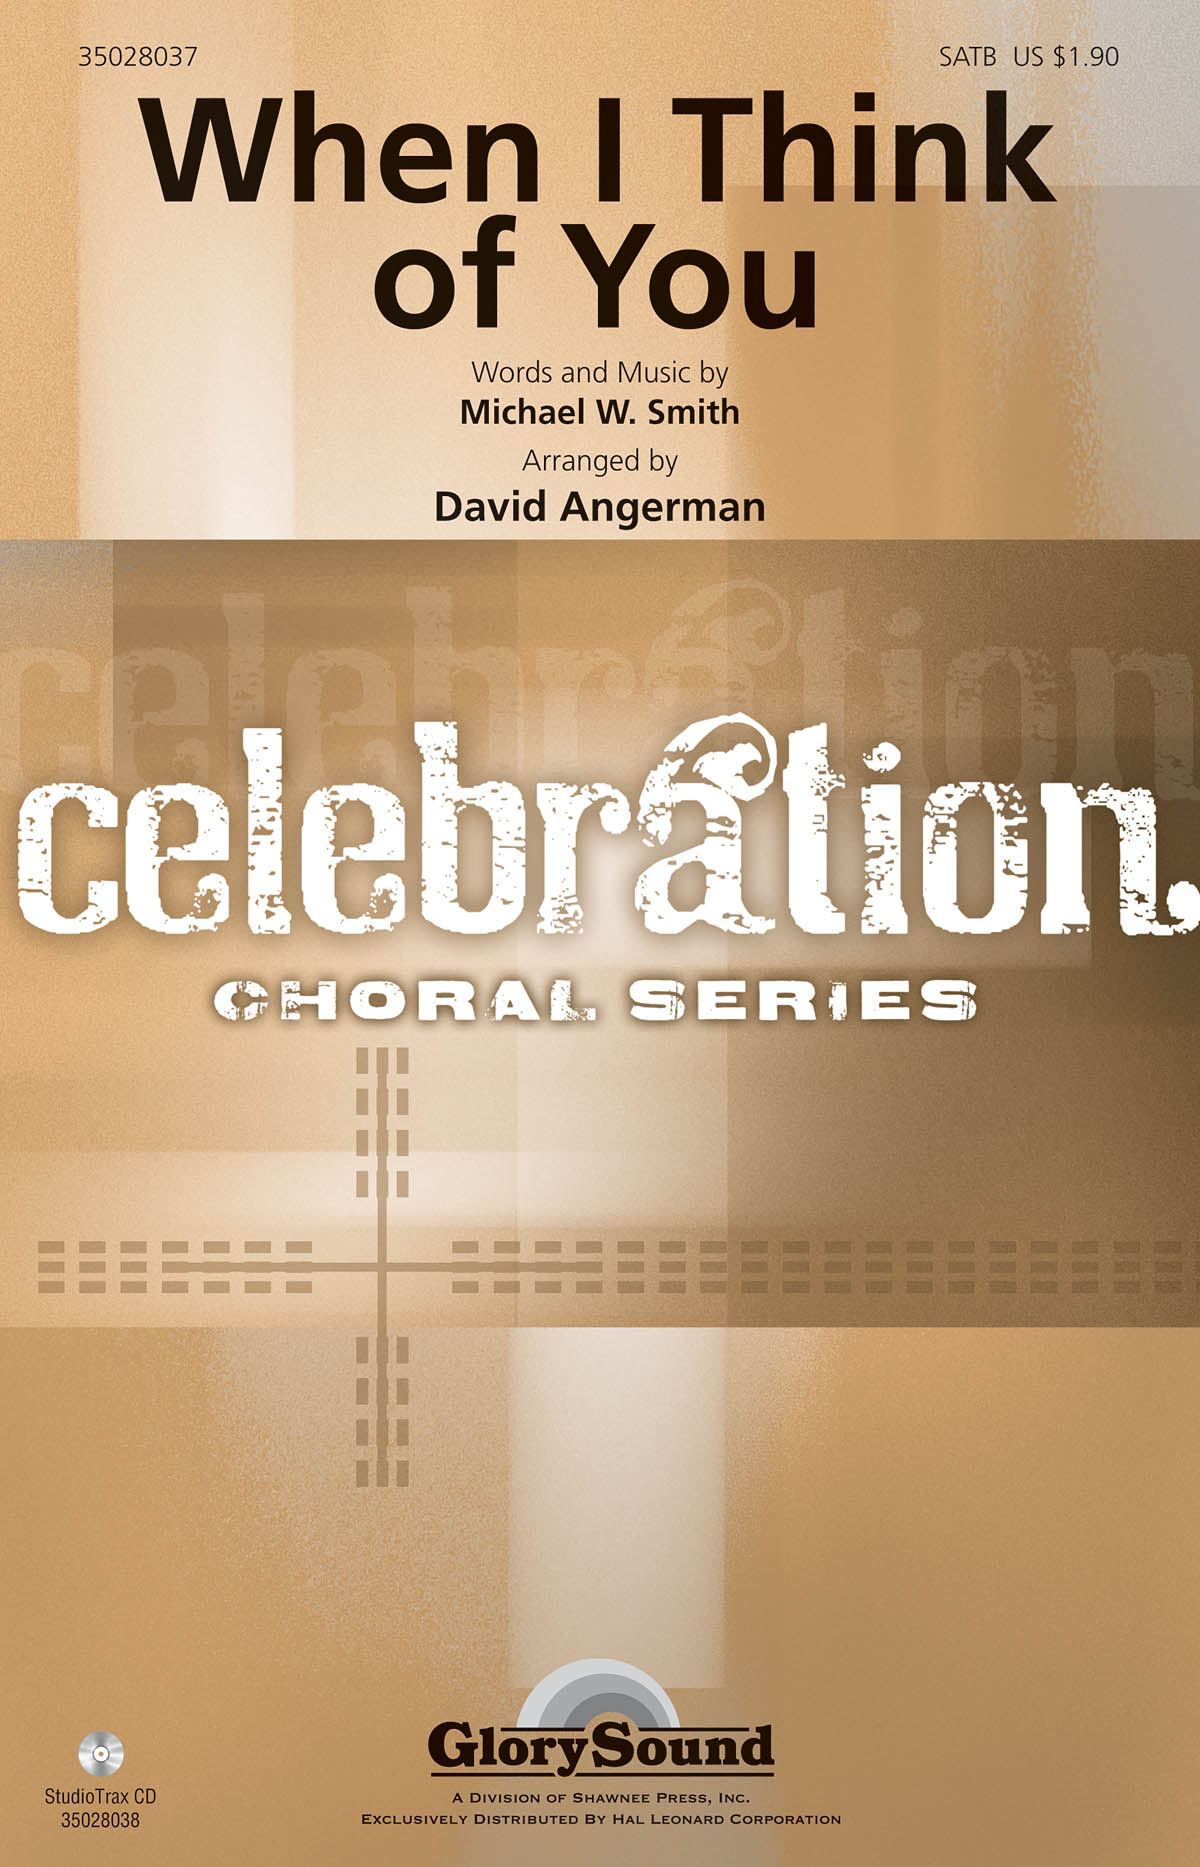 Michael W. Smith: When I Think of You: SATB: Vocal Score